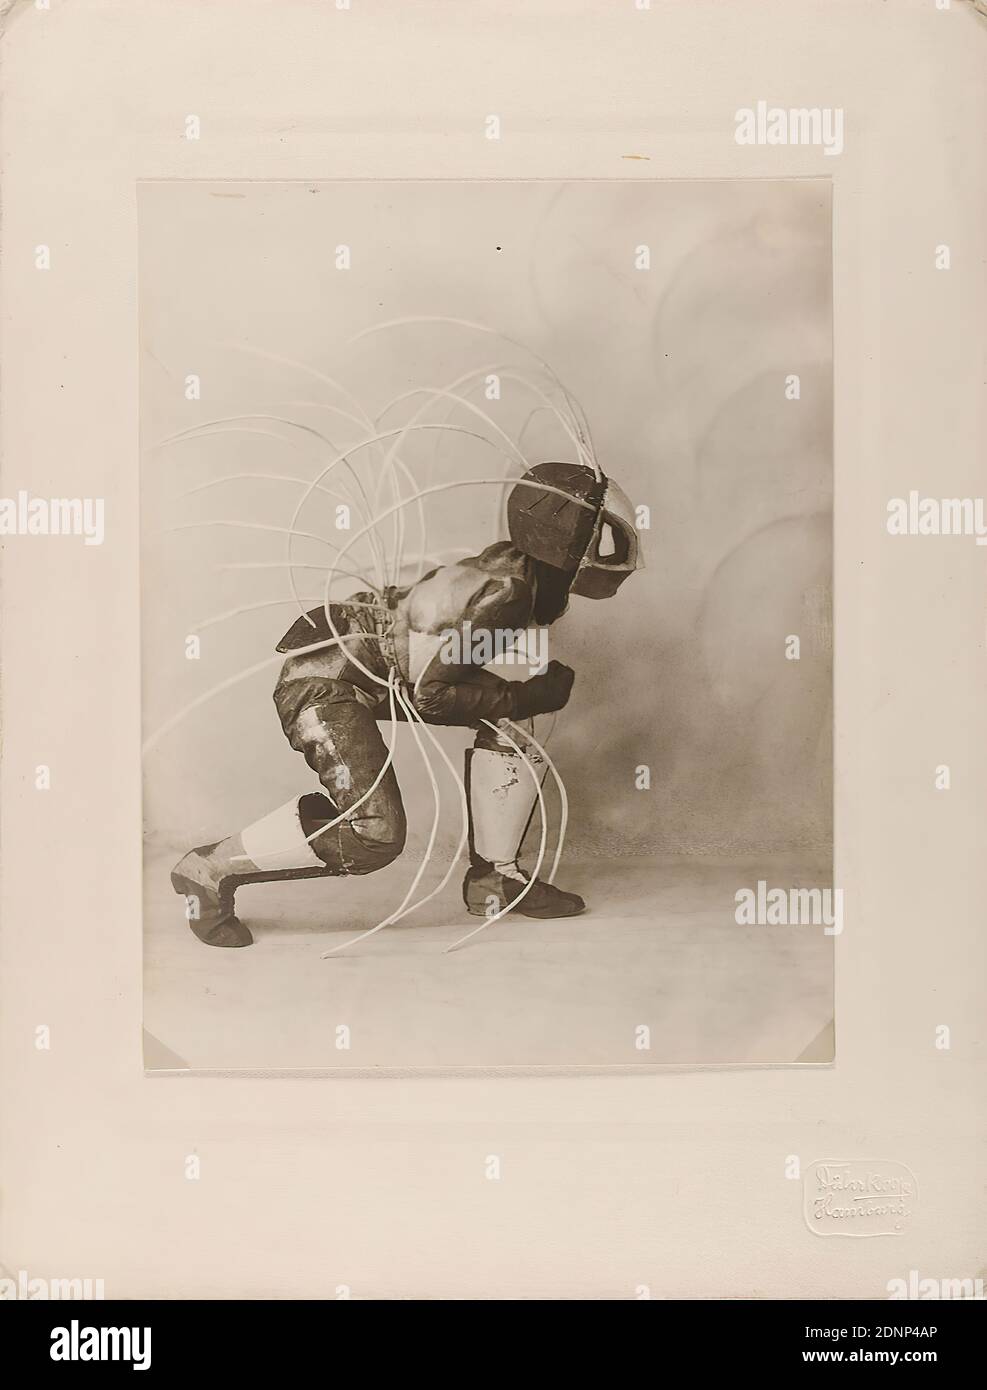 Minya Diez-Dührkoop, dance mask Toboggan Frau by Lavinia Schulz, silver gelatin paper, black and white positive process, picture size: height: 21,40 cm; width: 16,70 cm, dry stamp: recto u. r. on the cardboard: Dührkoop, Hamburg, inscribed: recto u. on the cardboard handwritten in lead, old and new inv.no, Repro No, Toboggan; on verso and handwritten in lead: old inv. no, repro no, dimensions, signed: recto and left: hardly visible, handwriting Dührkoop copied into the picture, theater photography, dancing Stock Photo